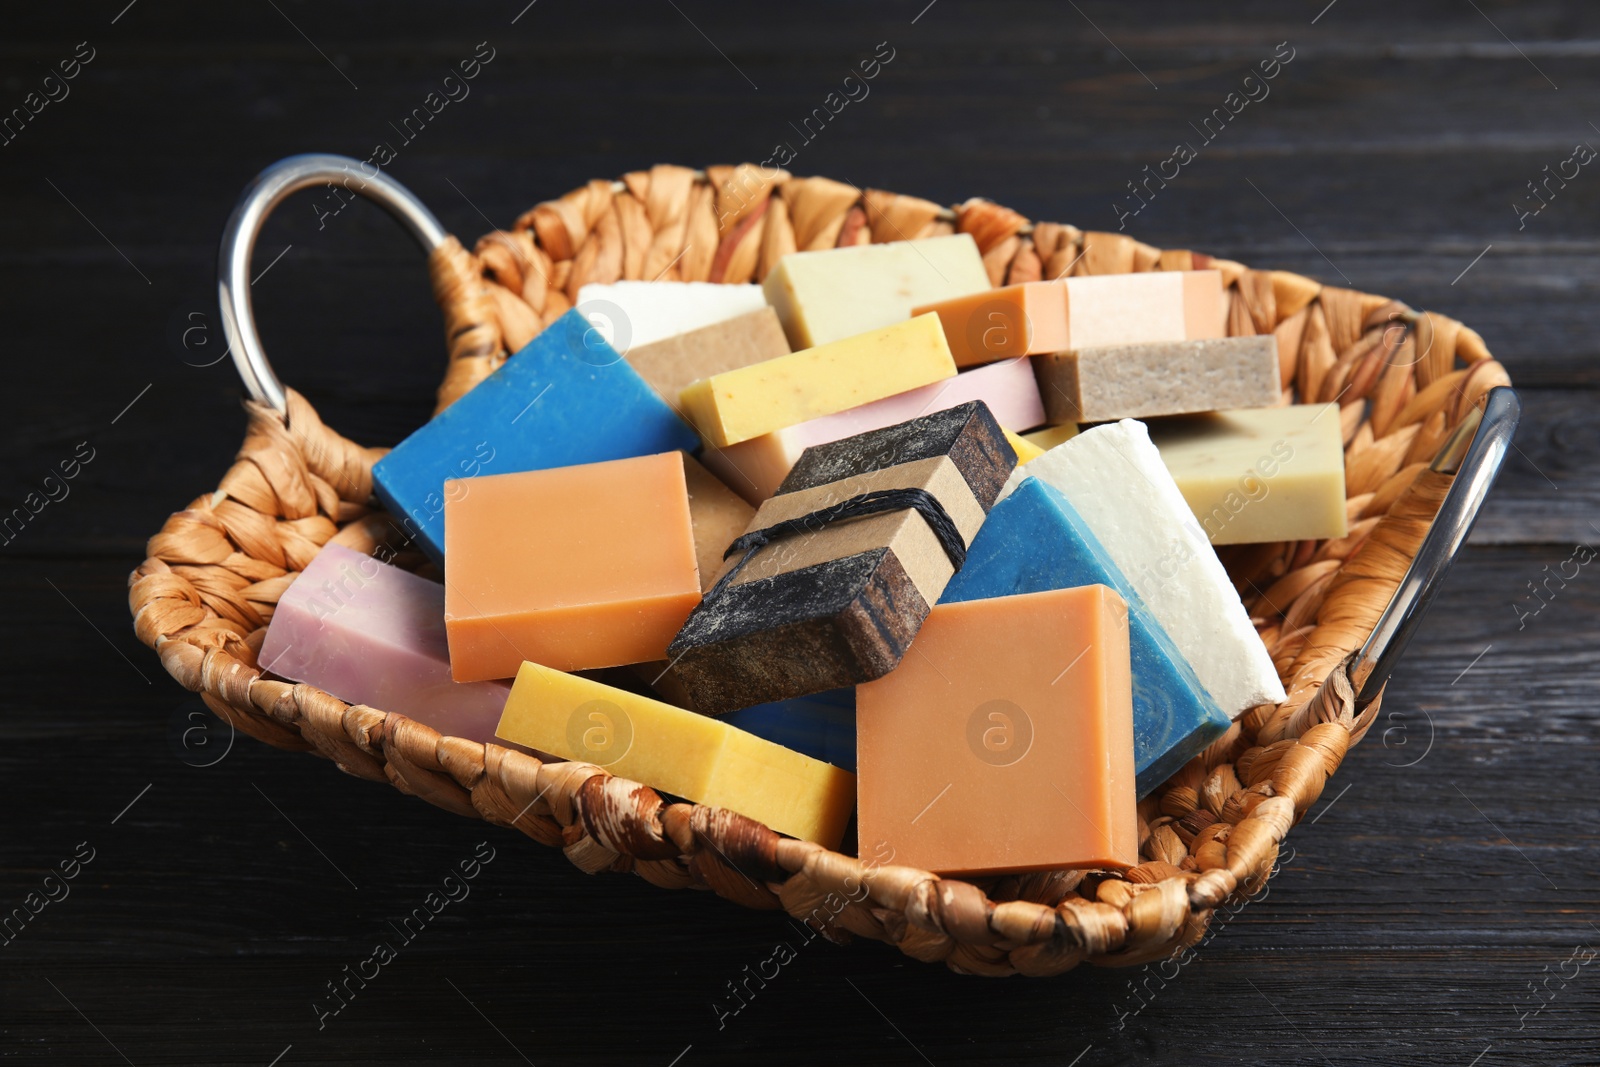 Photo of Many different handmade soap bars in wicker basket on table